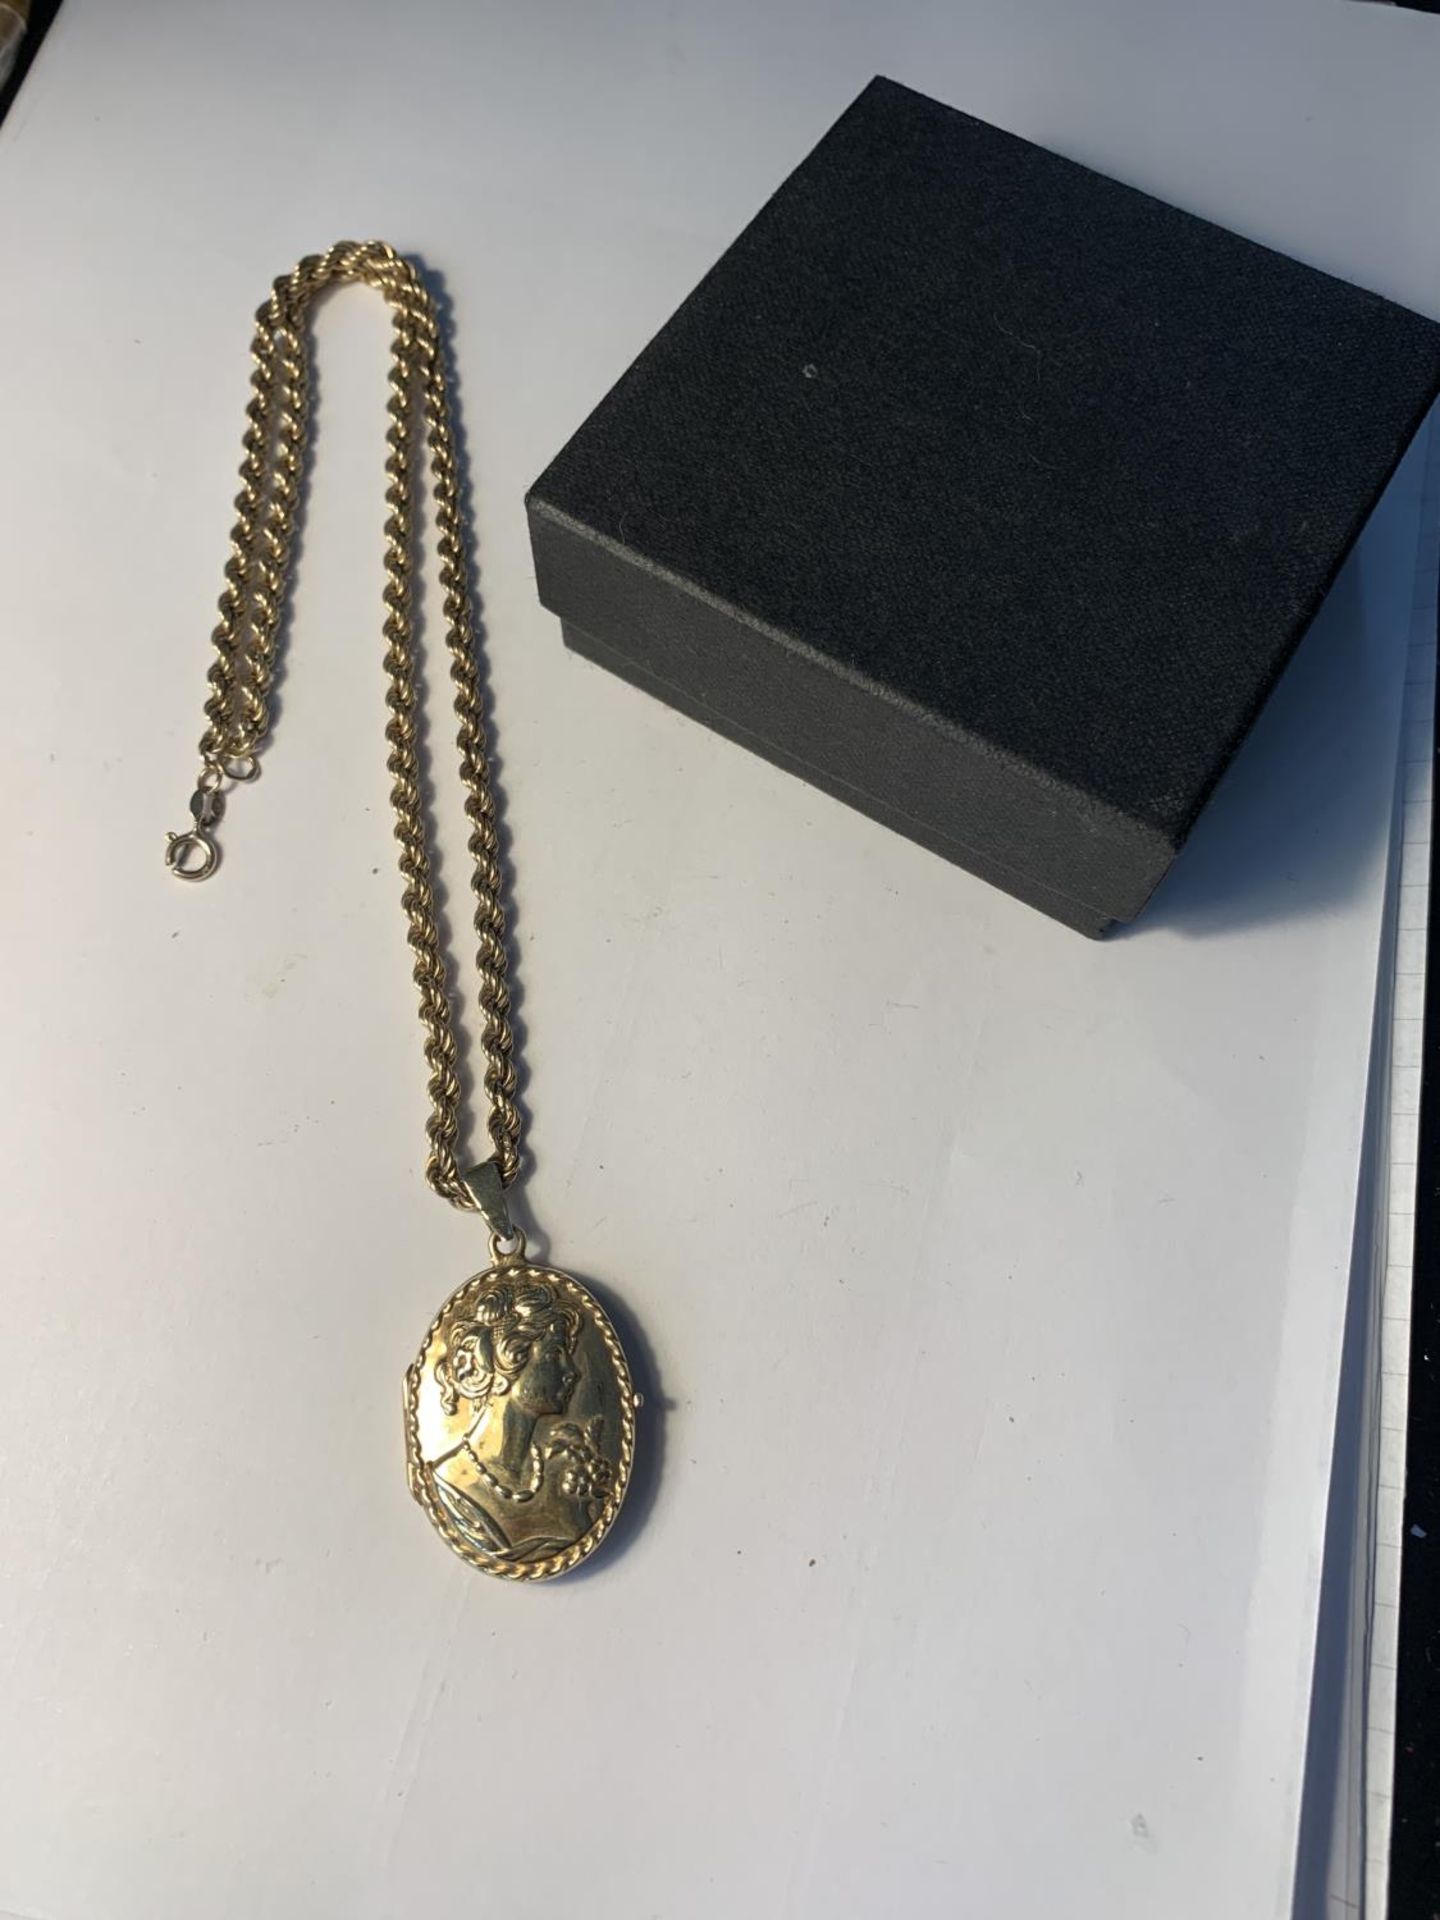 A 9 CARAT GOLD ROPE CHAIN WITH DECORATIVE LOCKET GROSS WEIGHT 13.6 GRAMS IN A PRESENTATION BOX